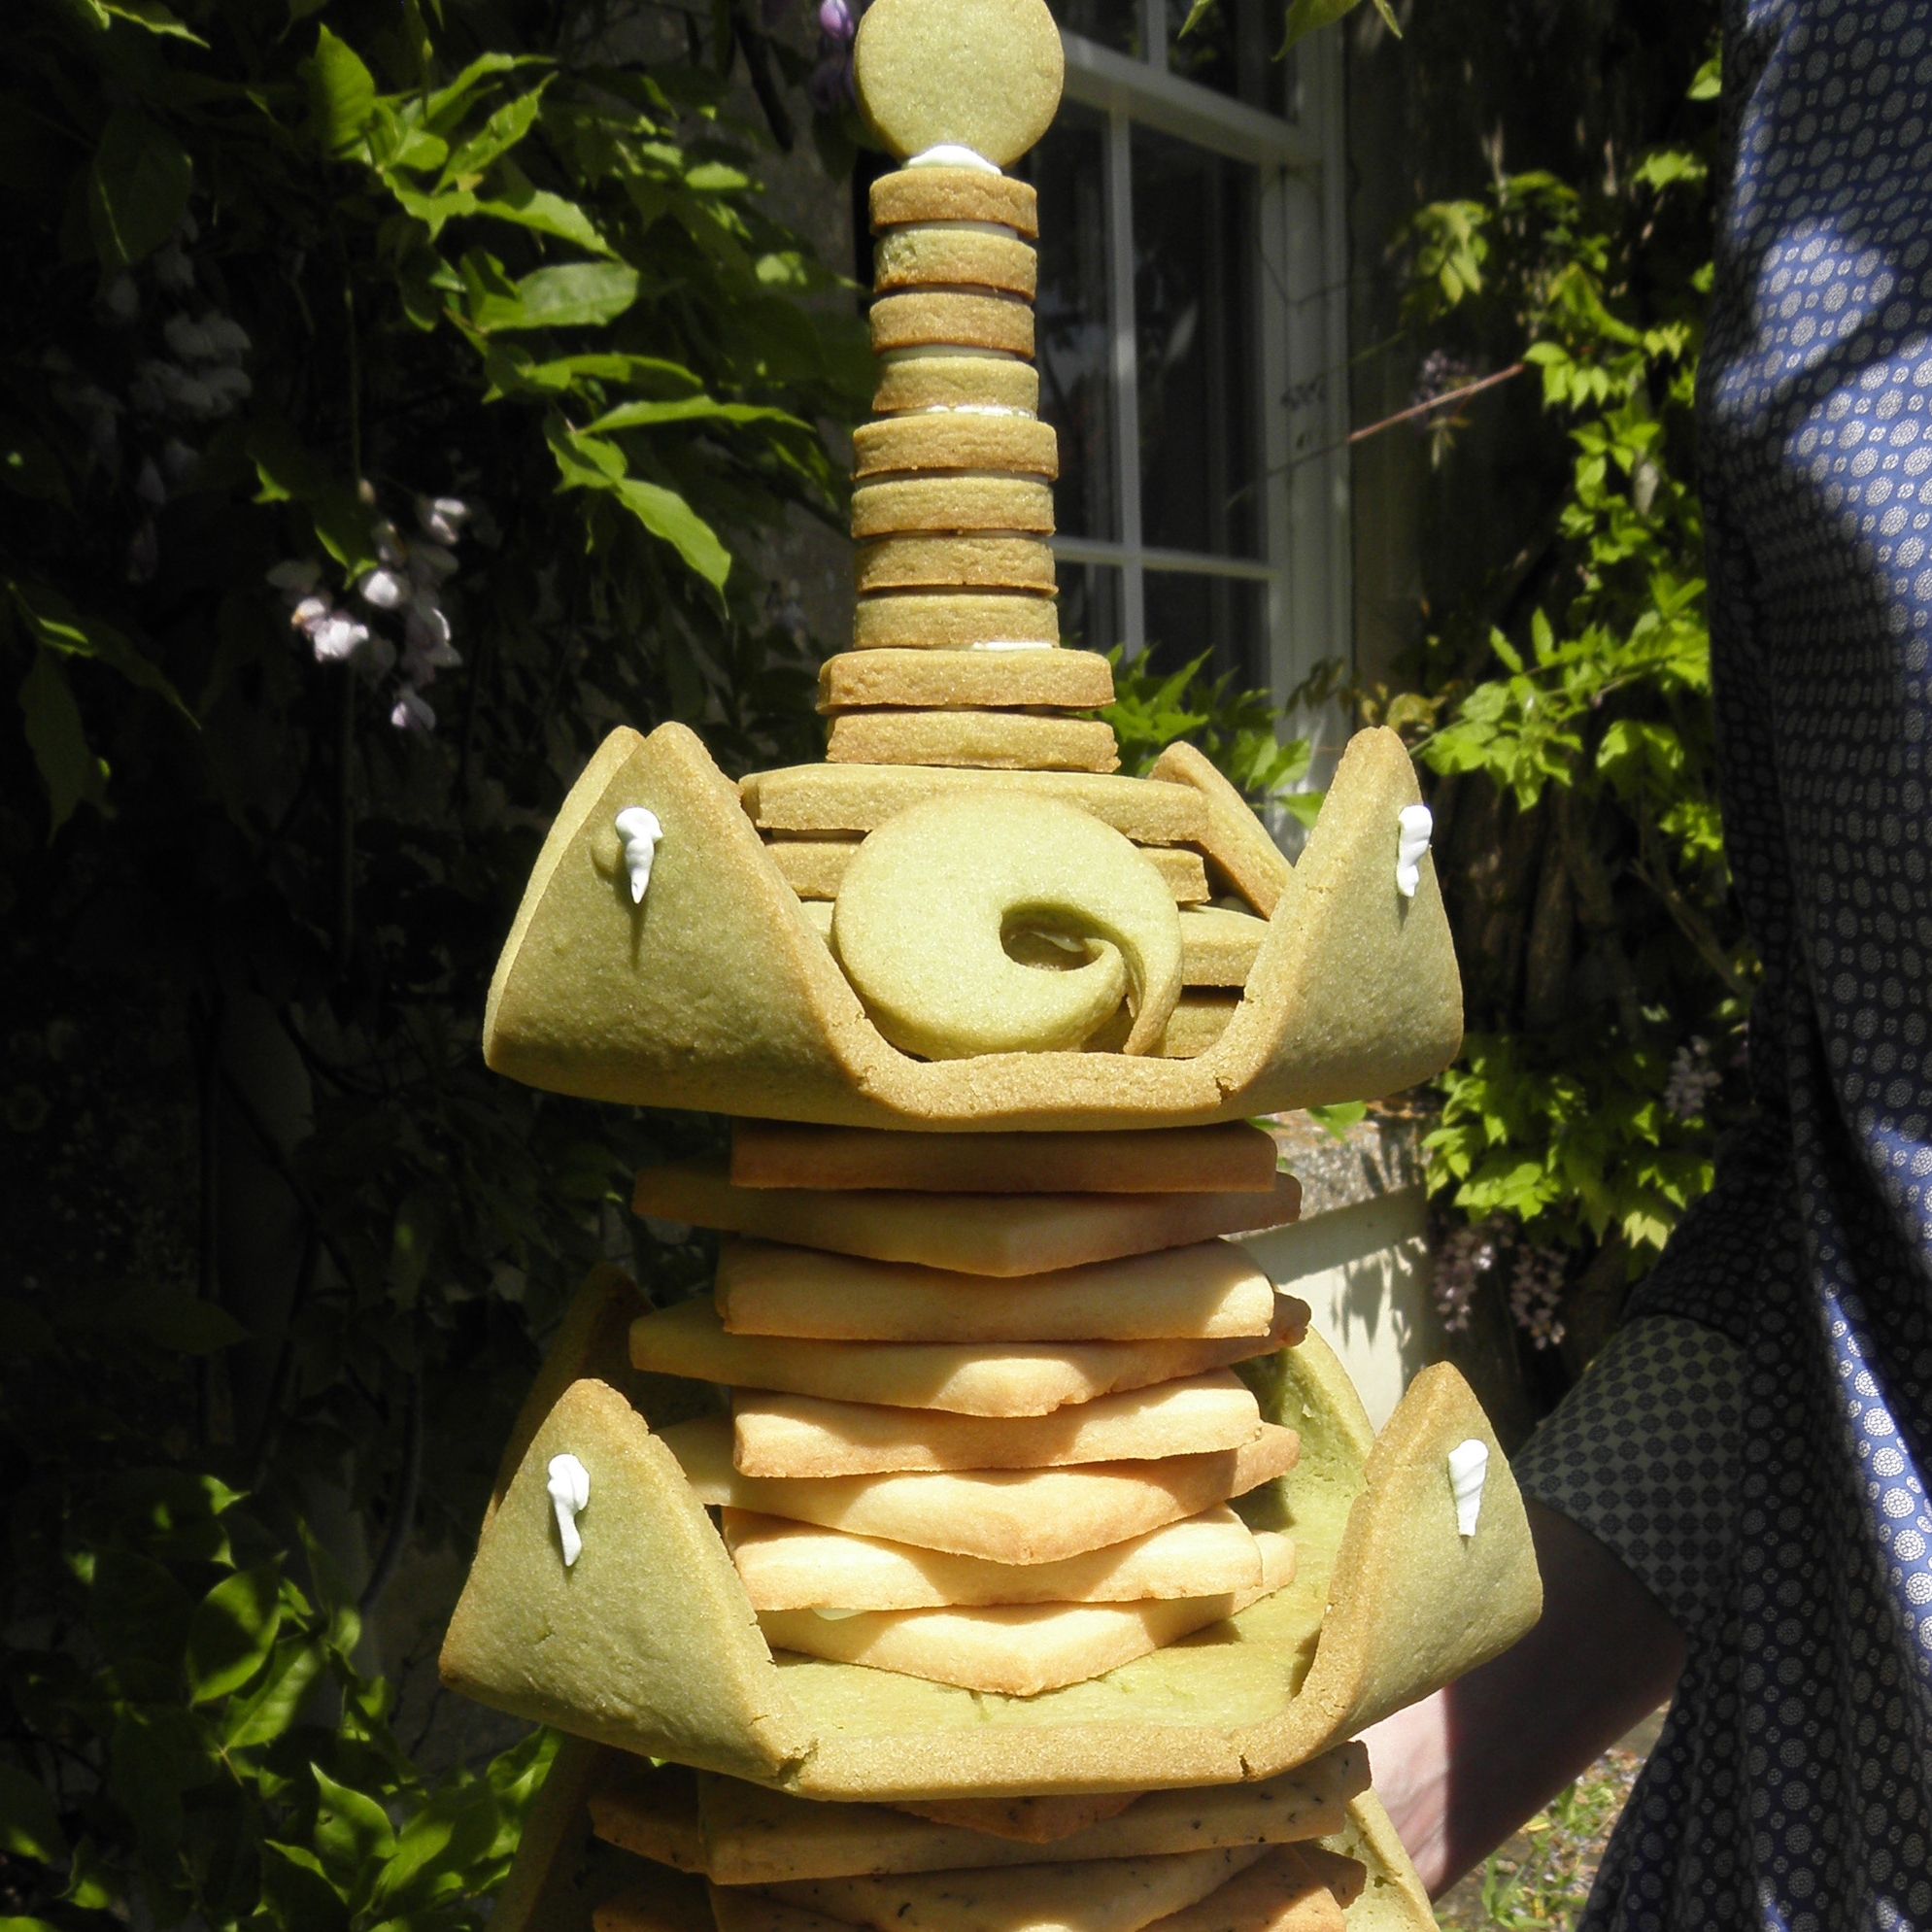 Japanese tea biscuit tower